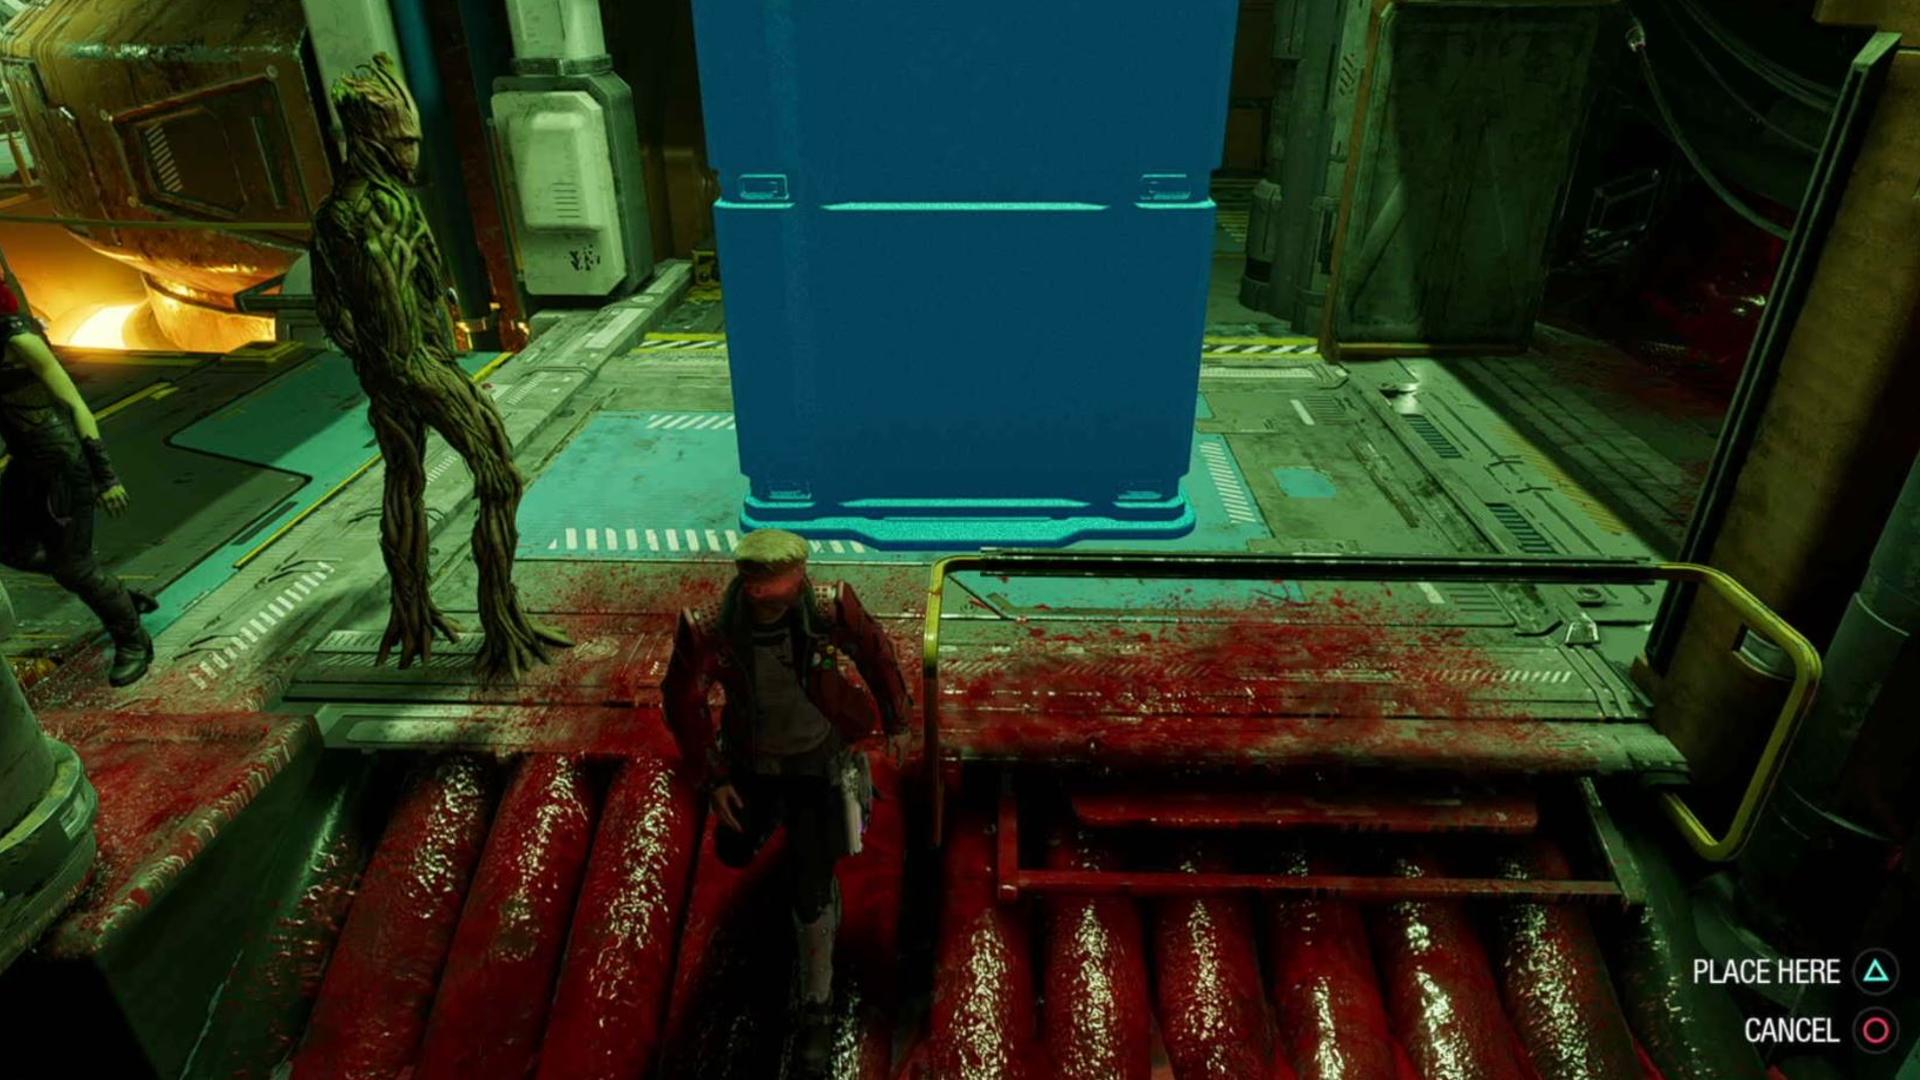 Guardians of the Galaxy outfit locations: Star-Lord is placing the box for Drax to move.